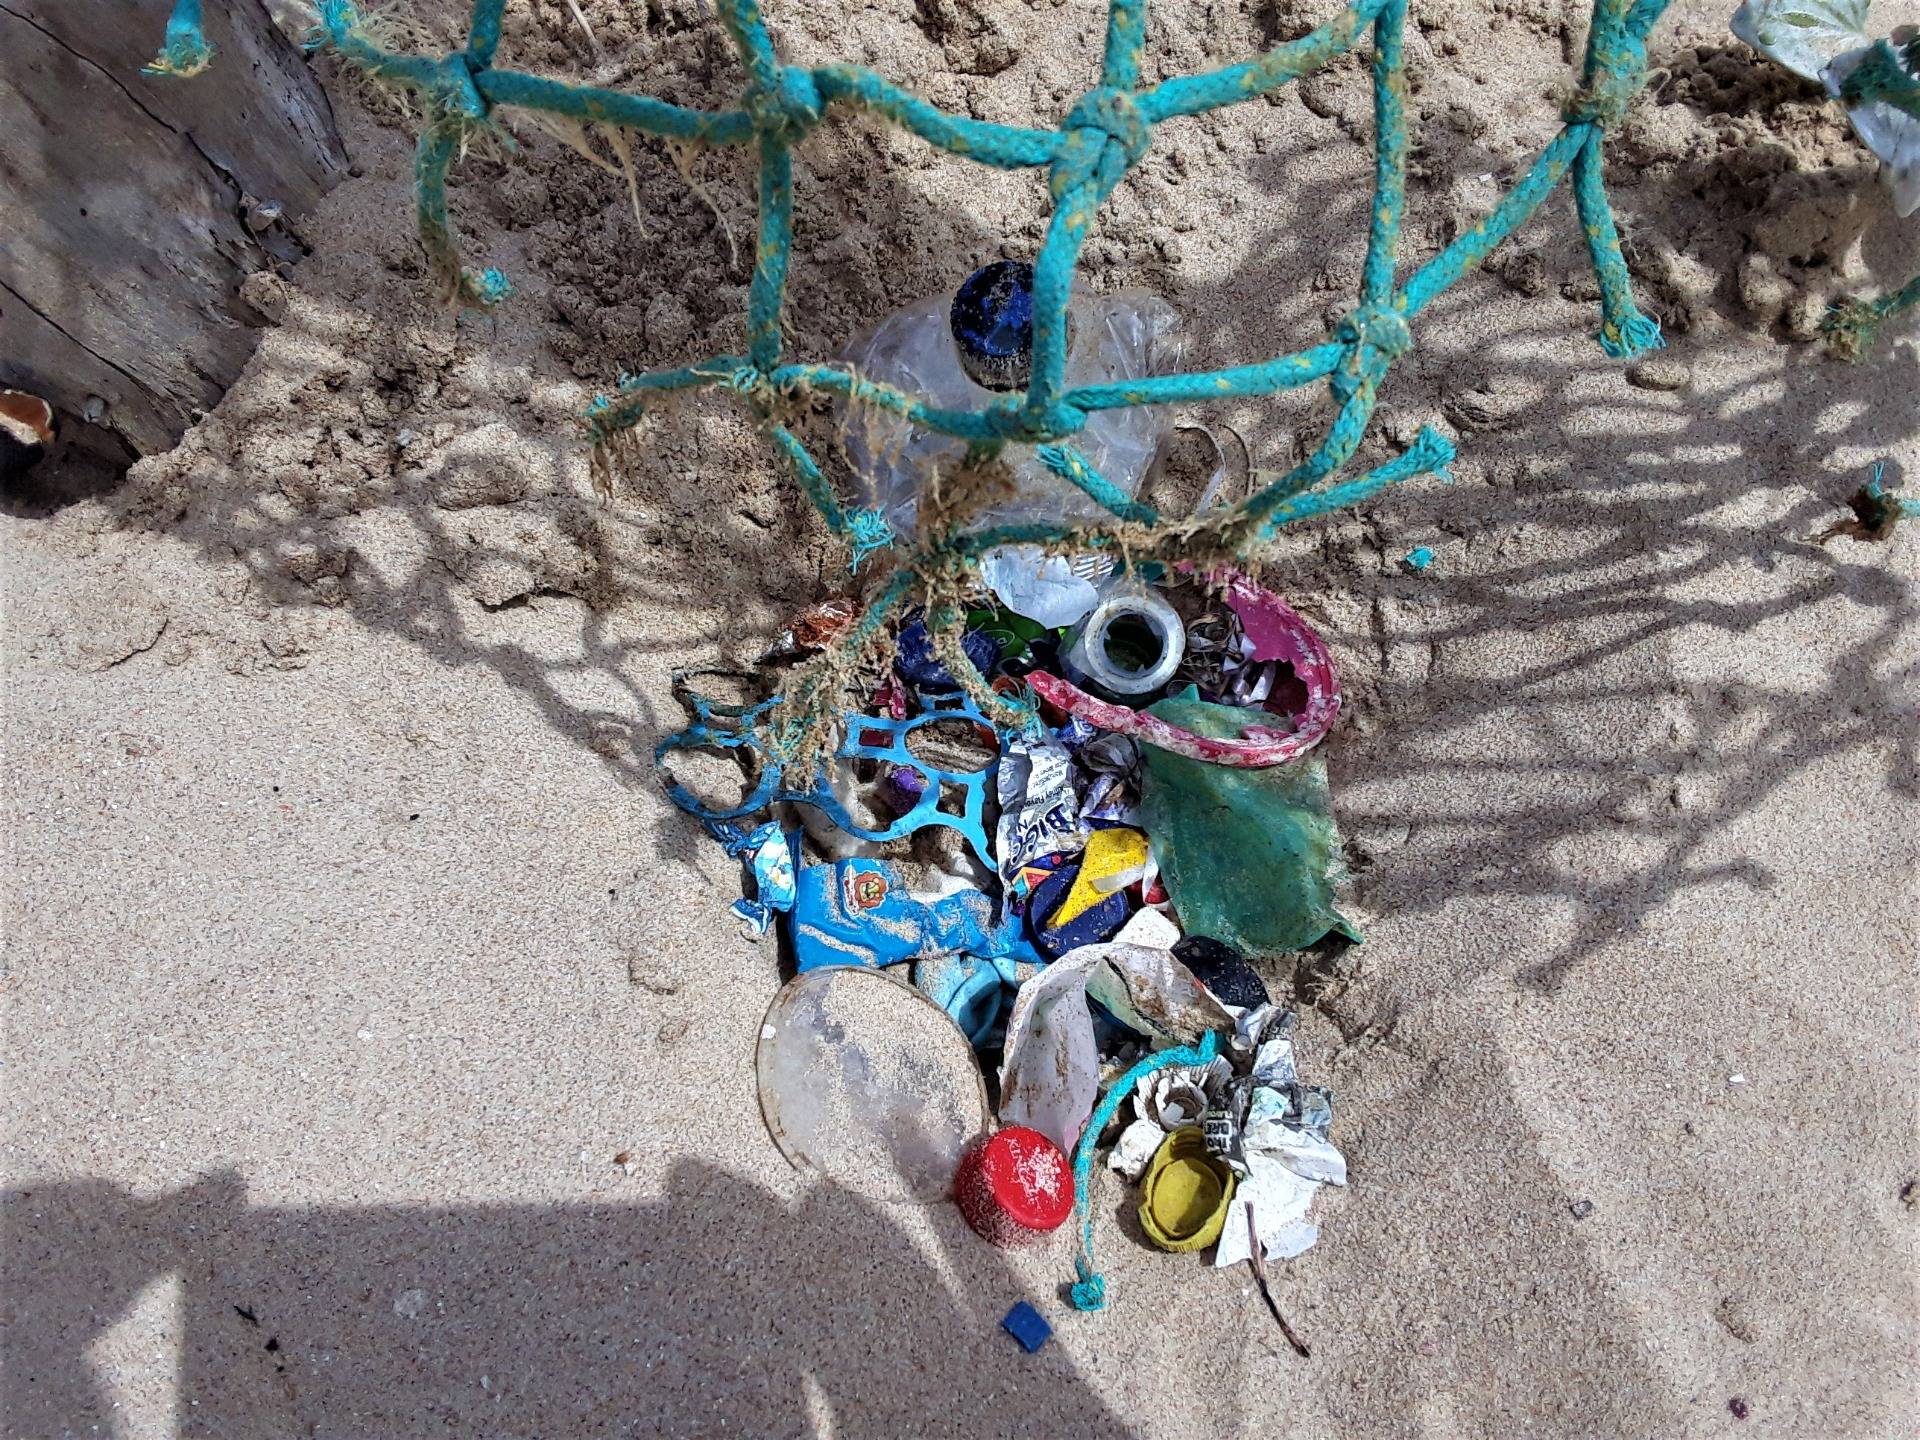 The plastic pollution I collected made a small pile, though this is going on all across the planet